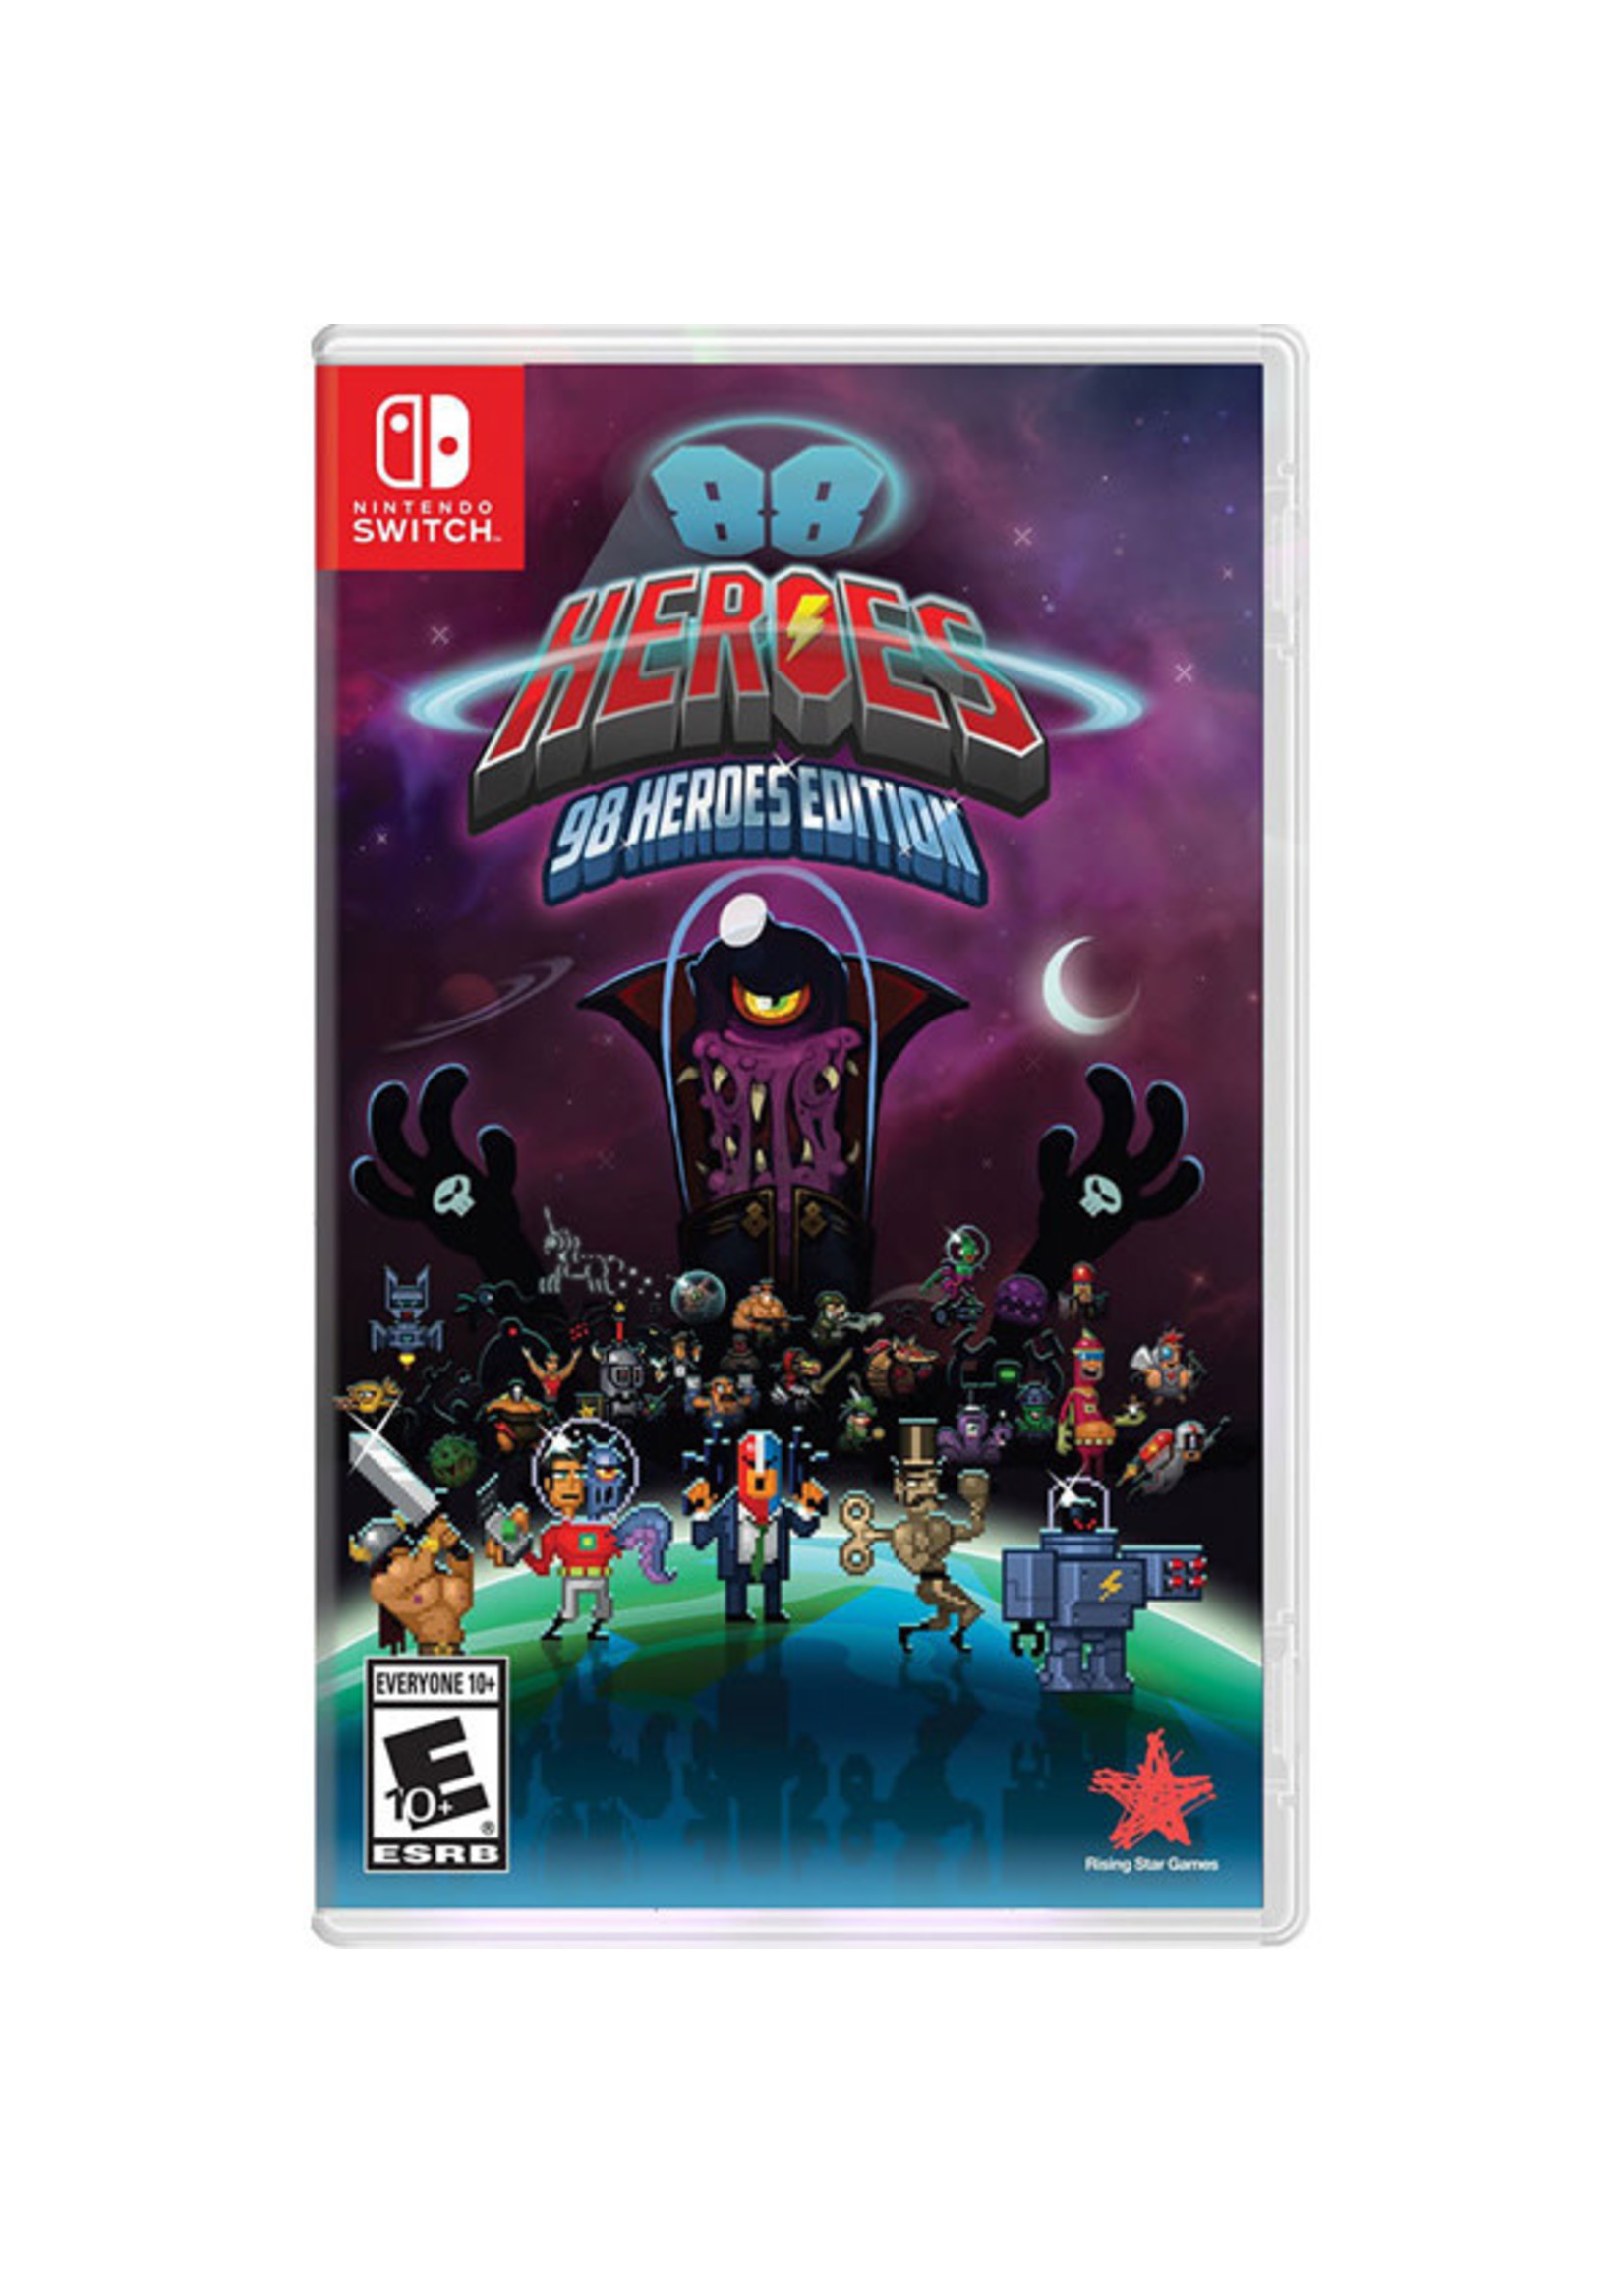 88 HEROES 98 HEROES EDITION SWITCH